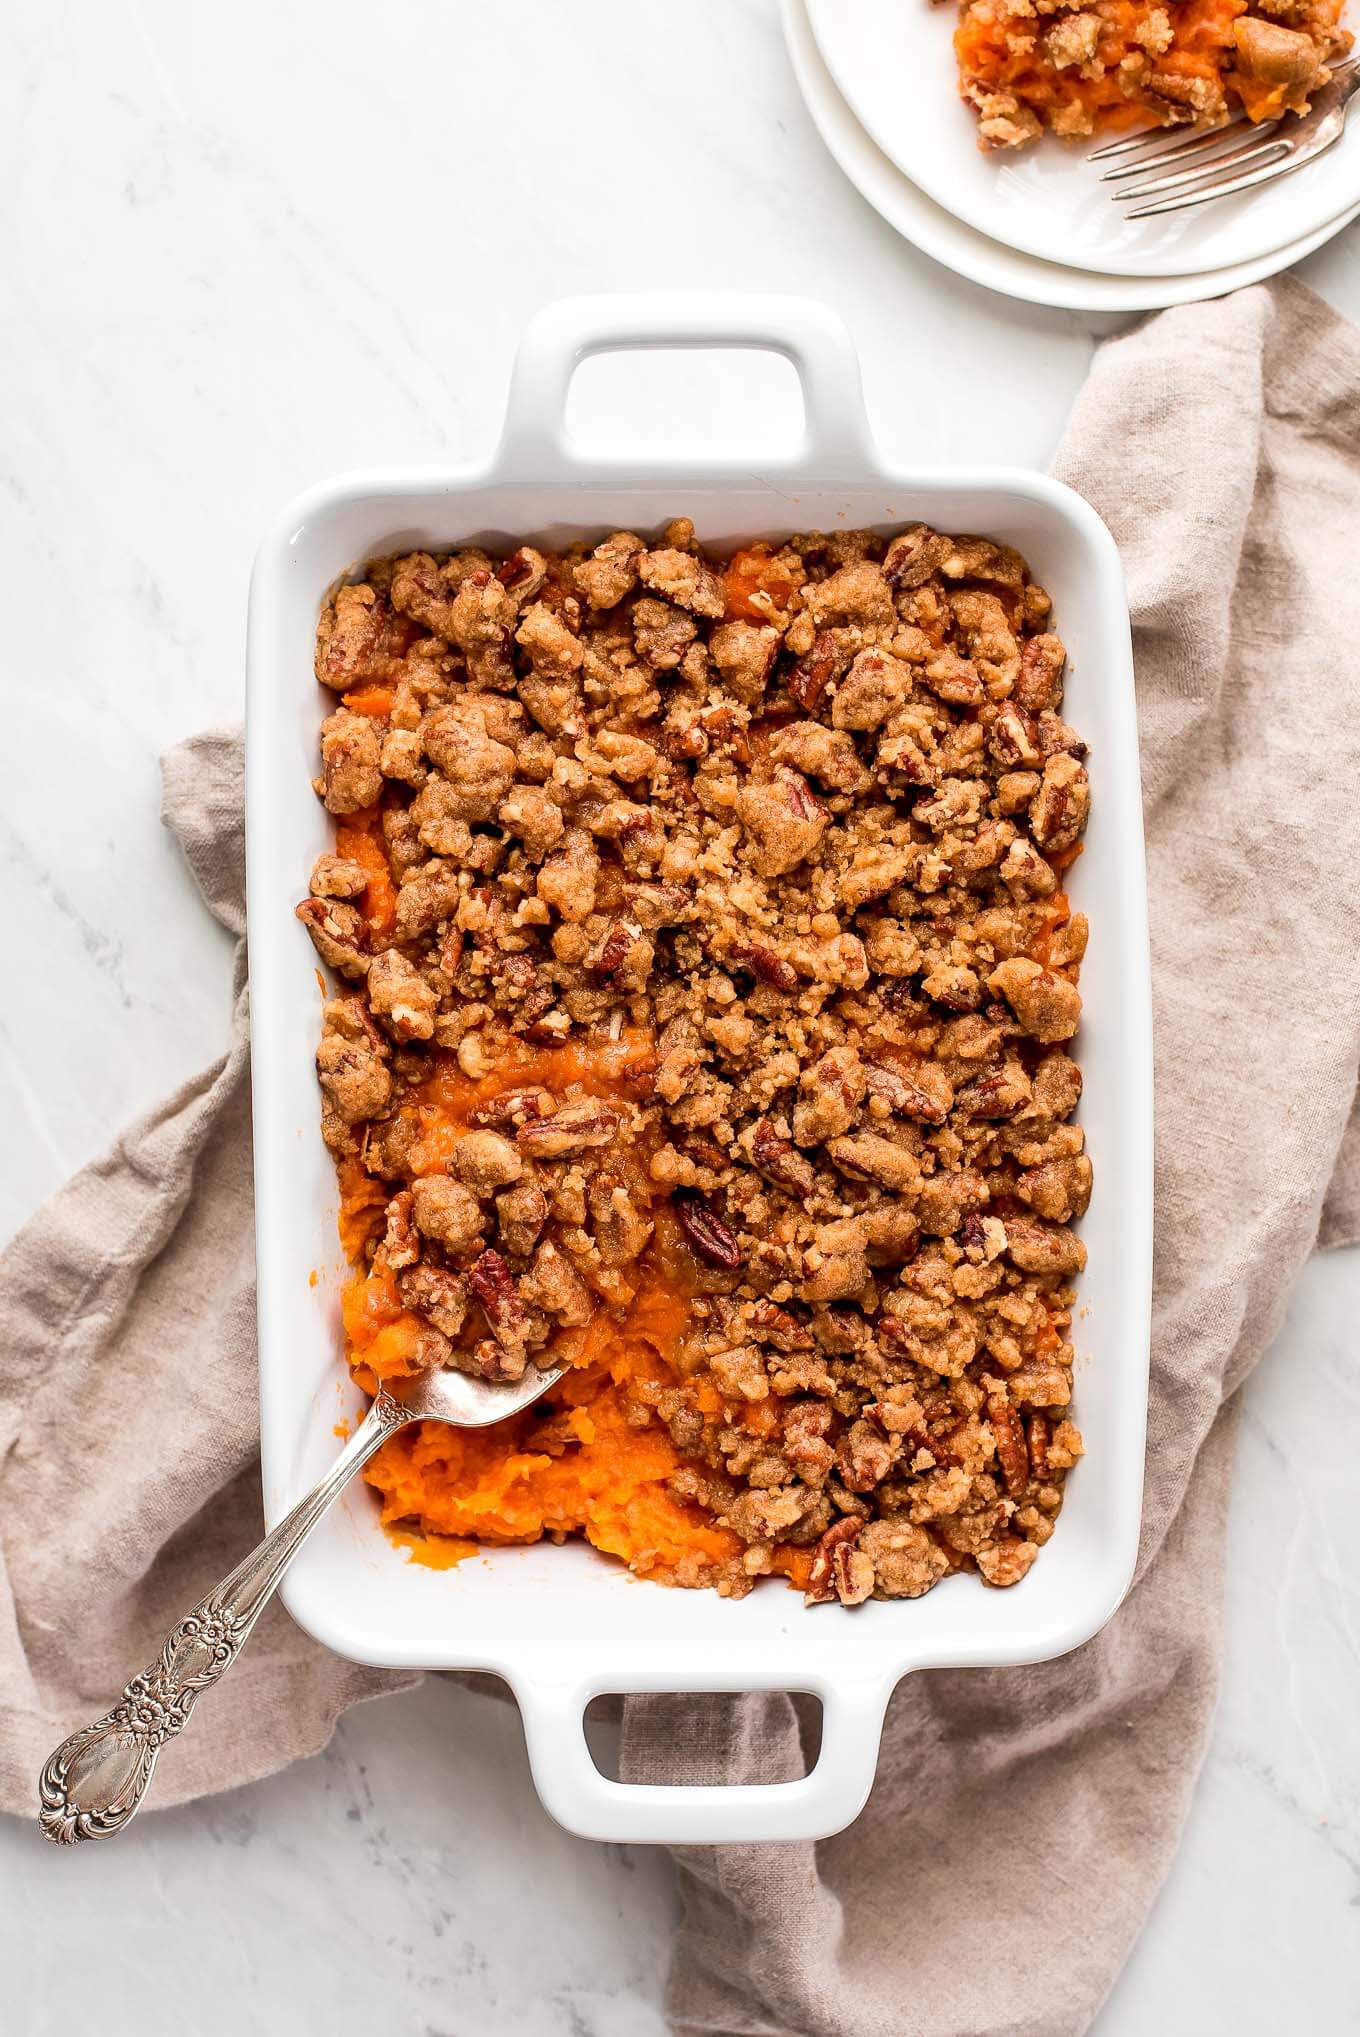 Top view of a sweet potato casserole on top of a napkin and a plate with a serving on it at the side.